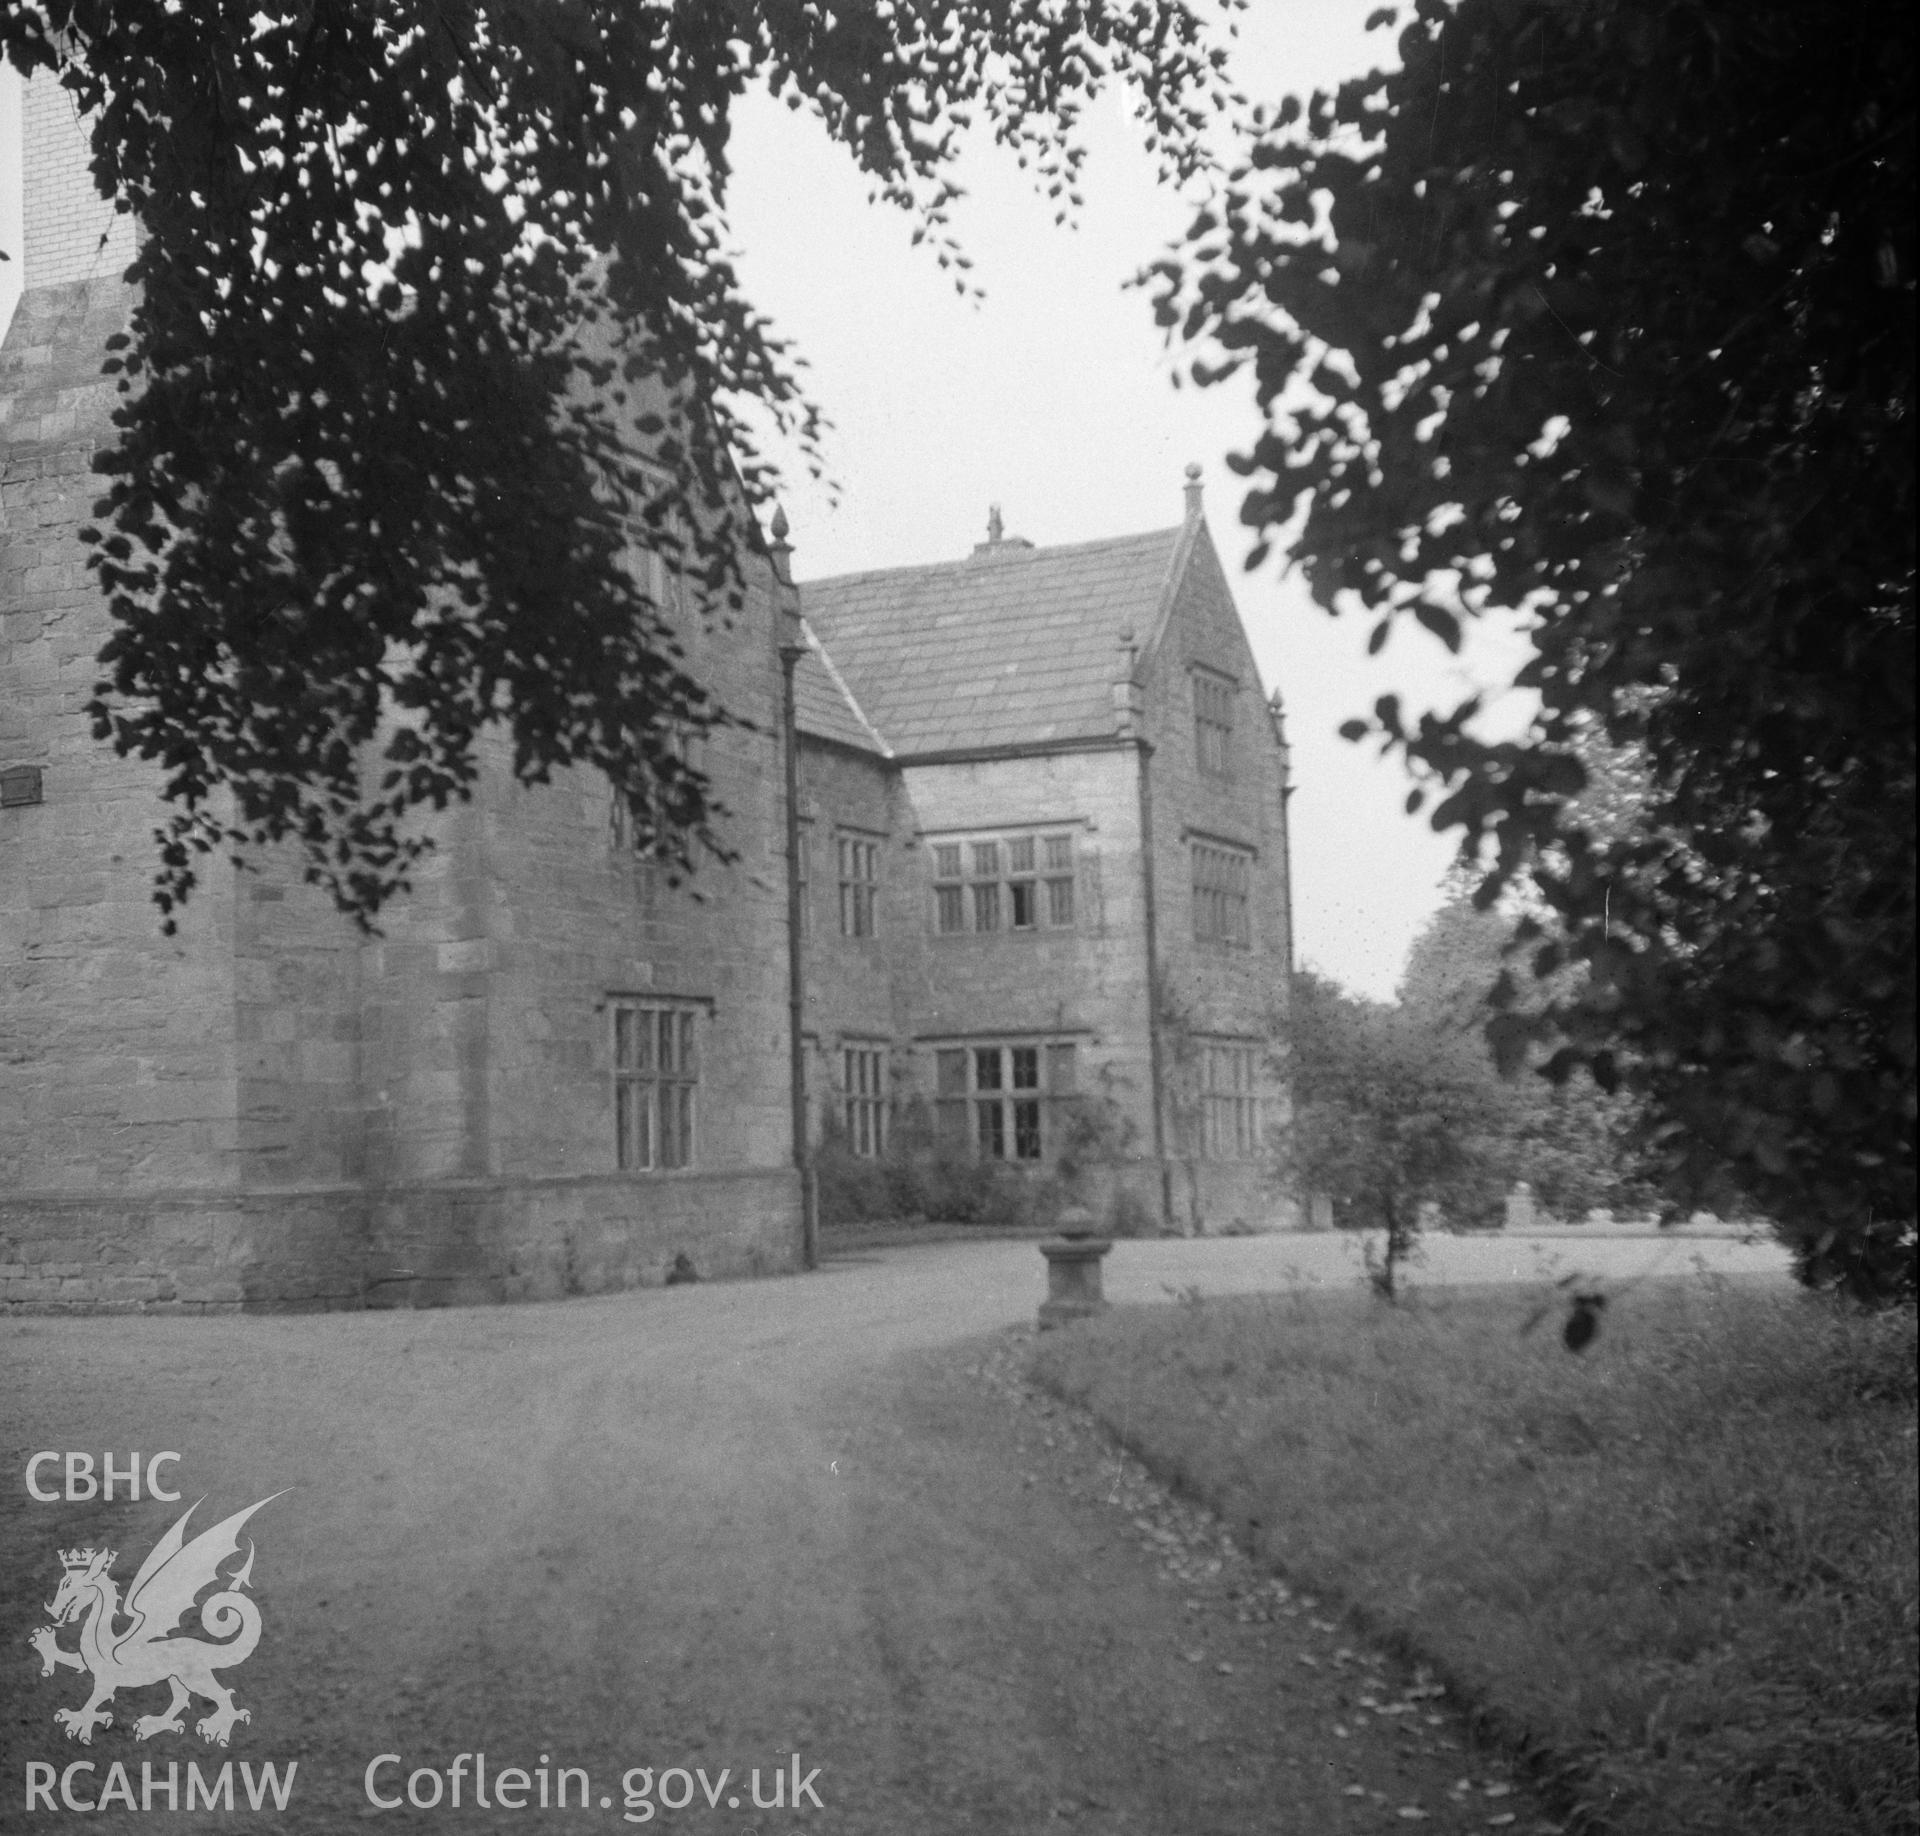 Digital copy of a black and white nitrate negative showing exterior, oblique view of front elevation, Pentrehobyn Hall.